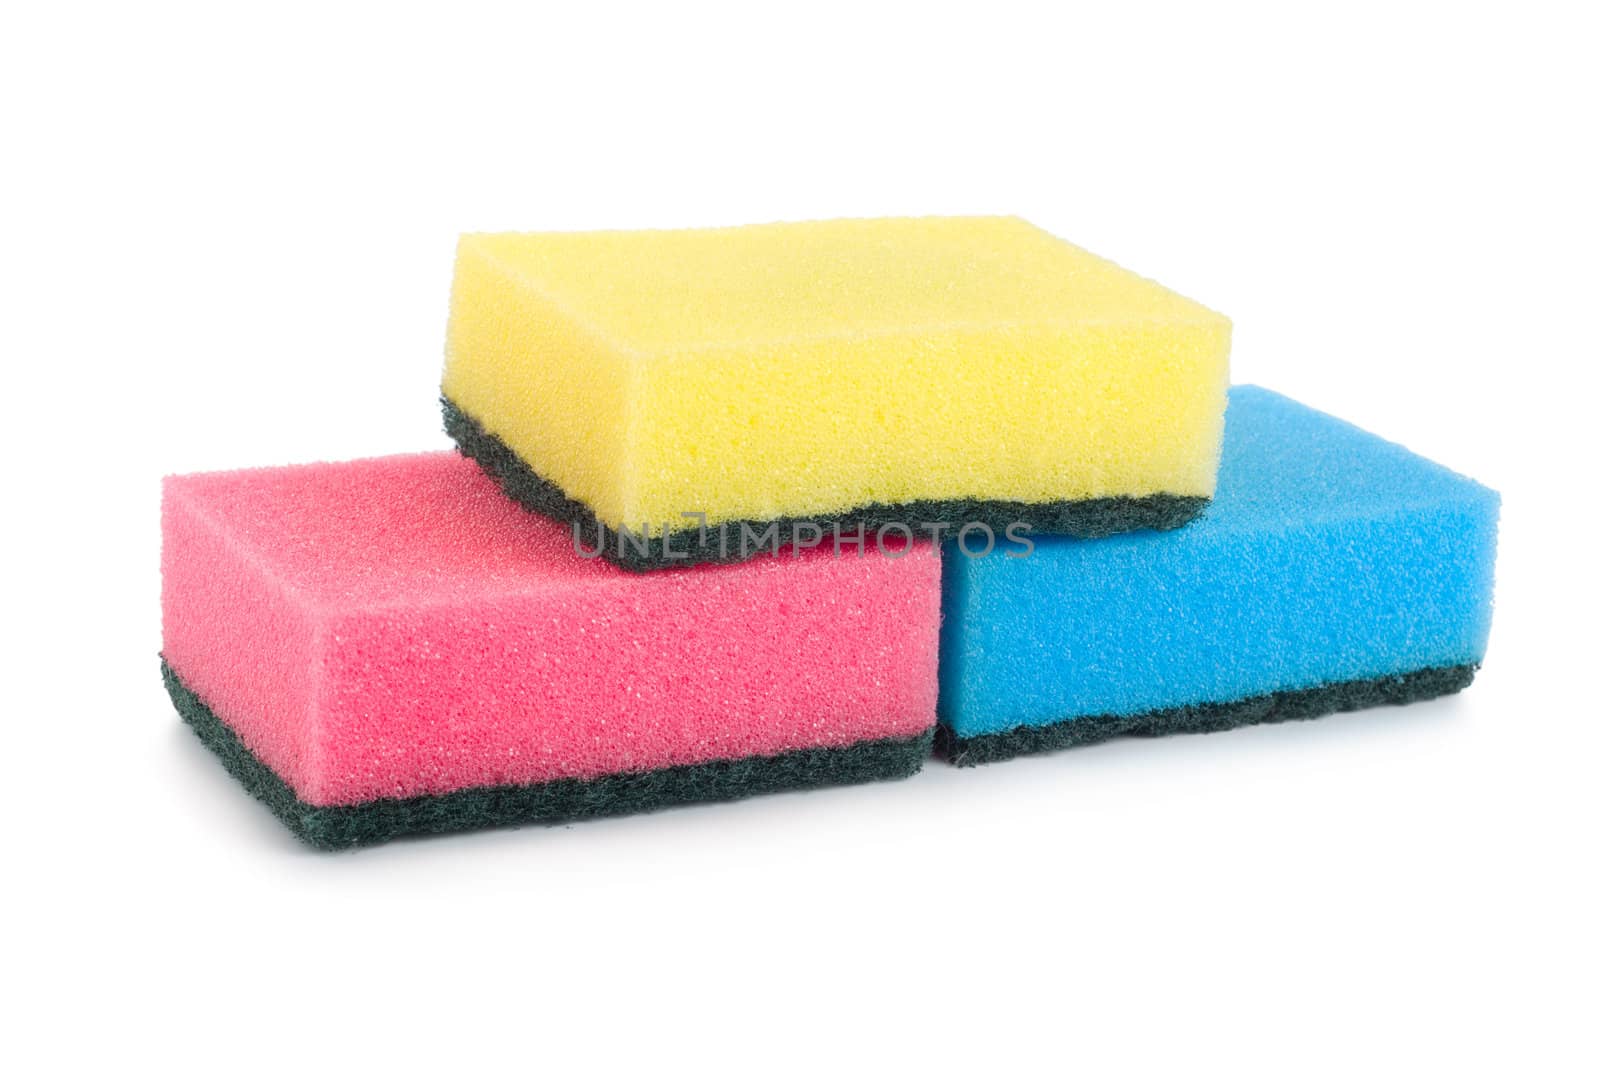 Three colored sponges by Givaga